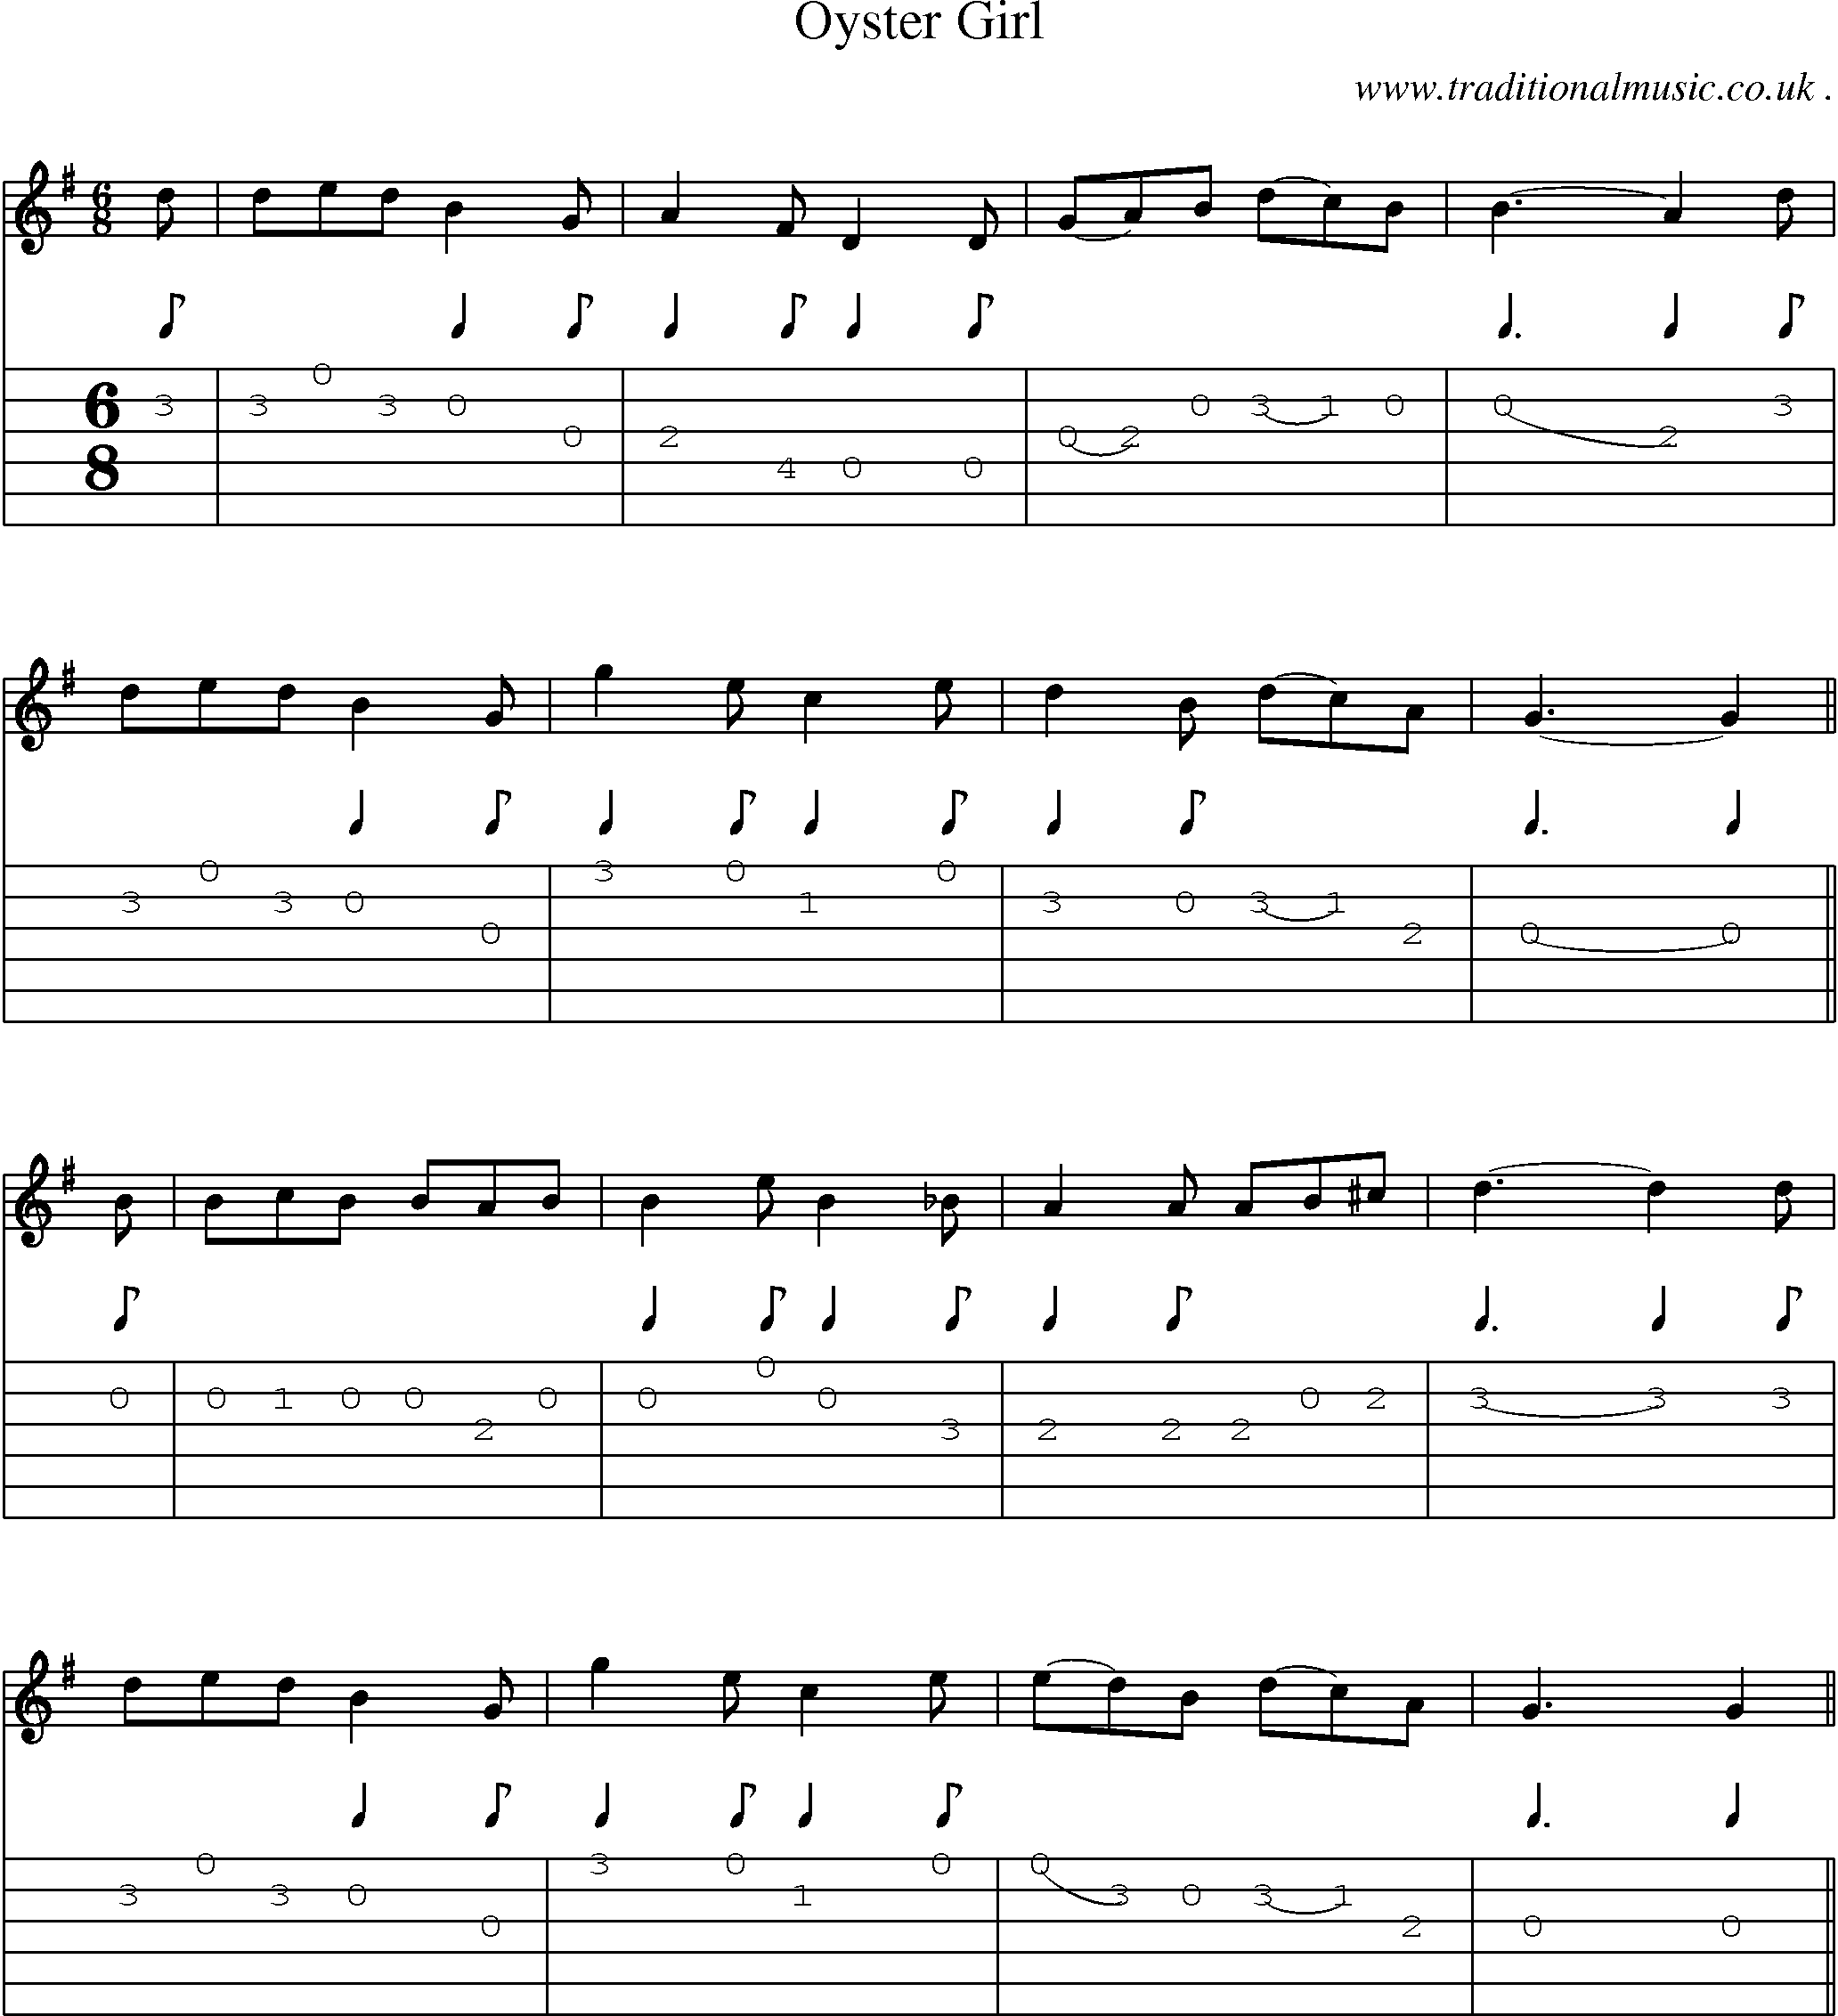 Sheet-Music and Guitar Tabs for Oyster Girl